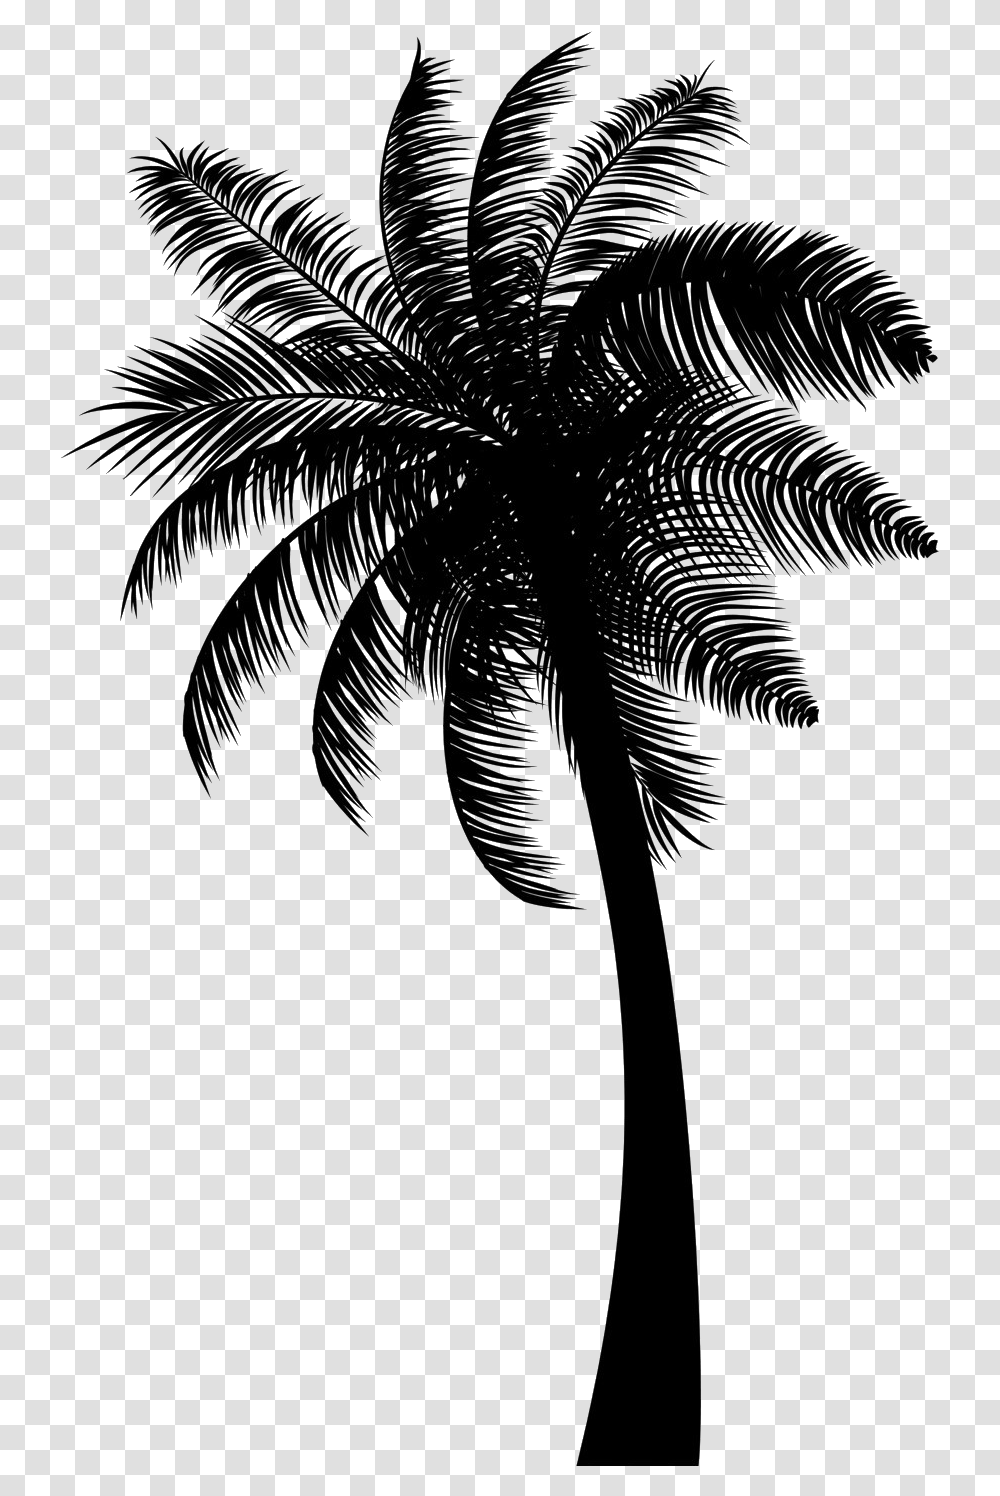 Black Coconut Tree Free Black Coconut Tree, Plant, Palm Tree, Silhouette, Outdoors Transparent Png